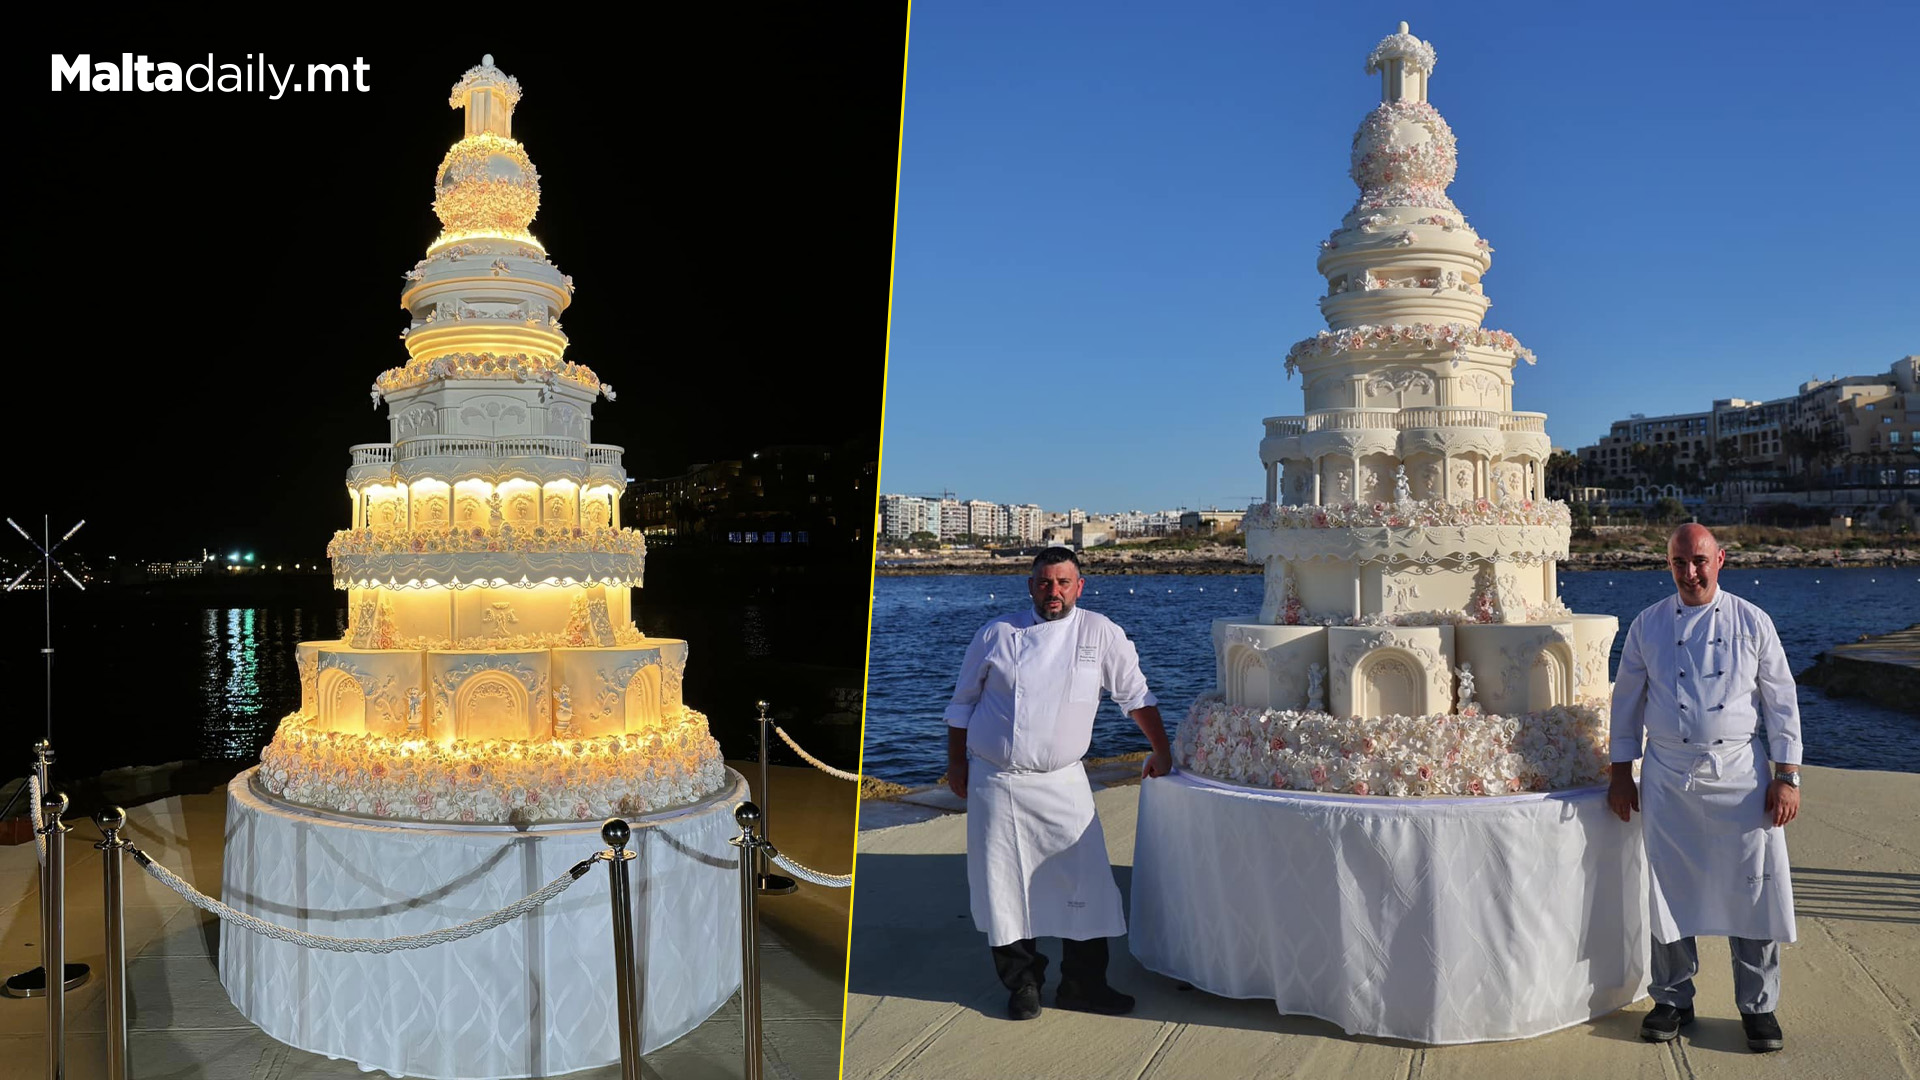 Could This Be The Biggest Wedding Cake In Malta?